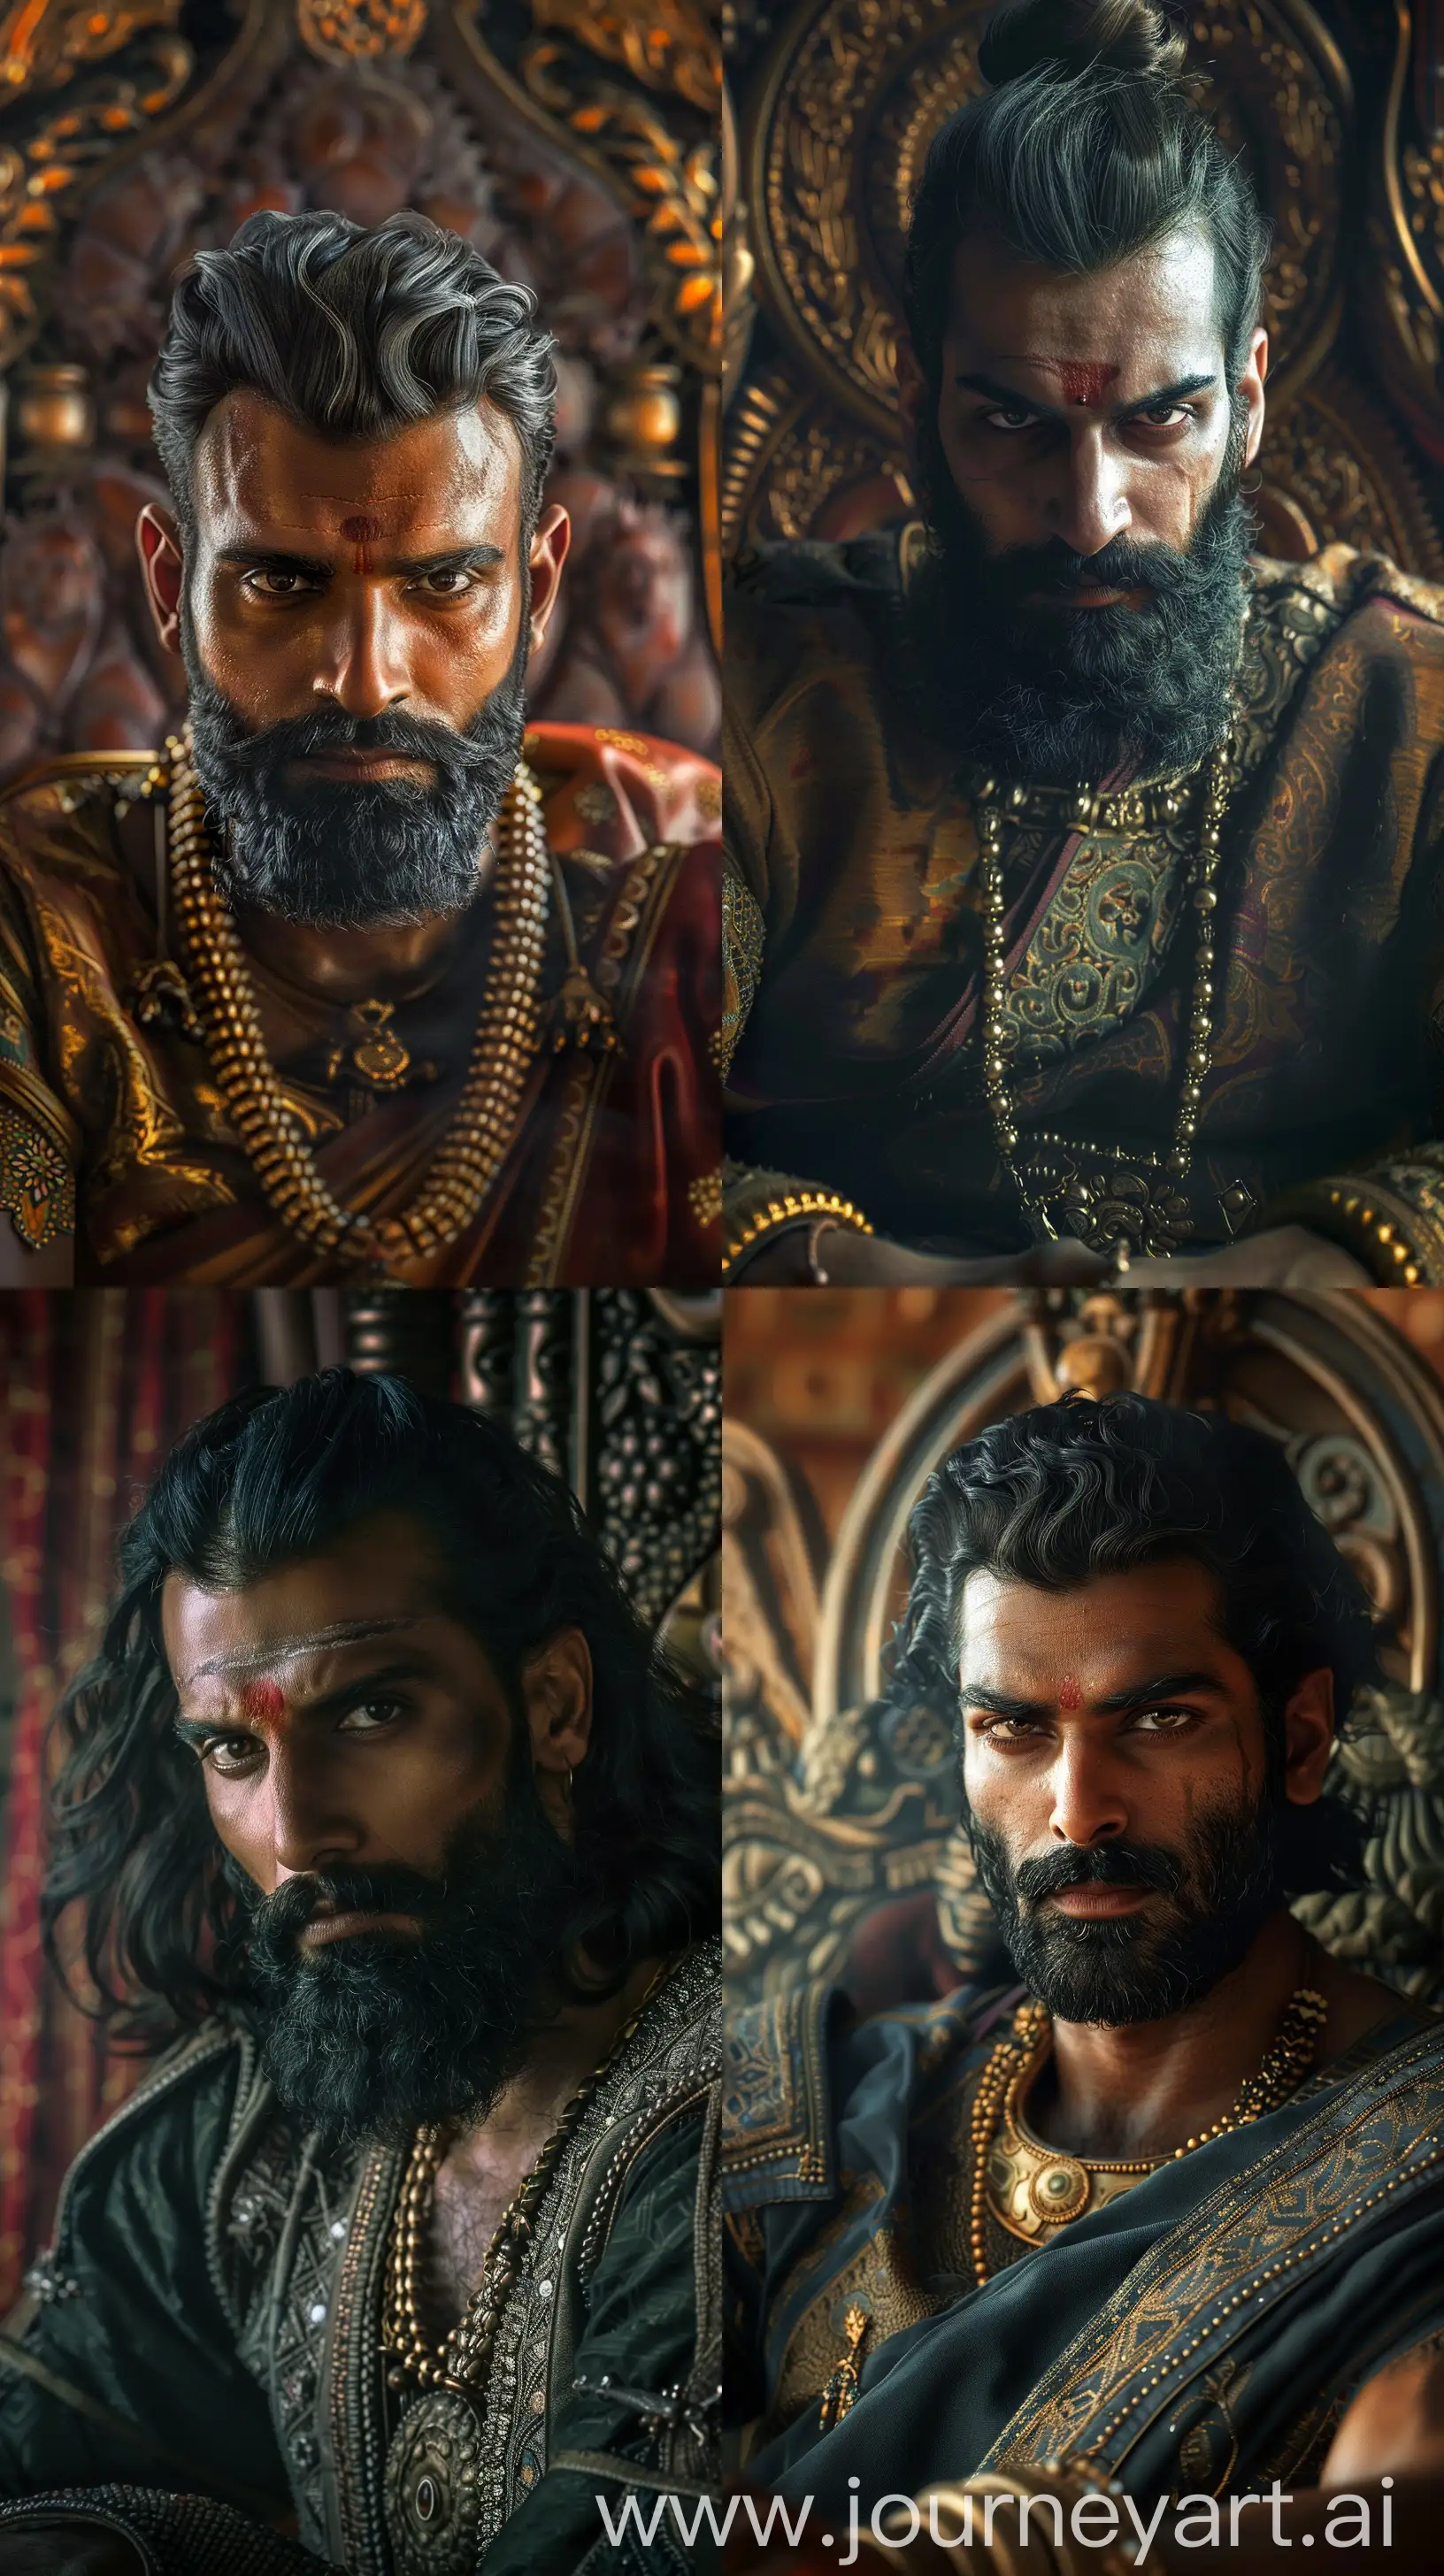 Majestic-Indian-King-Seated-on-Ornate-Throne-in-Cinematic-CloseUp